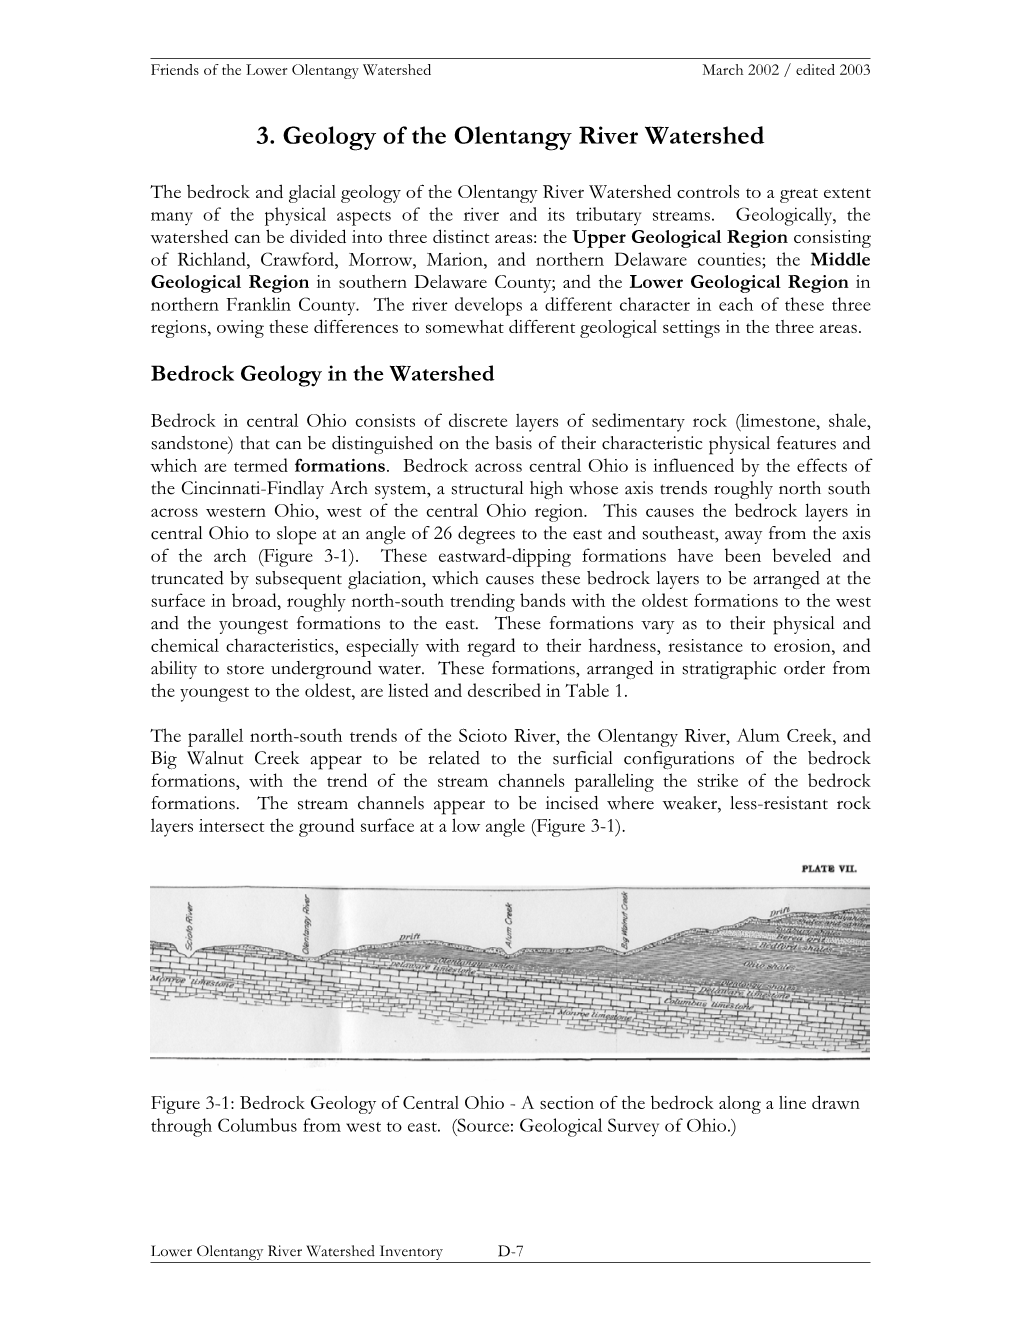 Section 3 – Geology of the Olentangy River Watershed